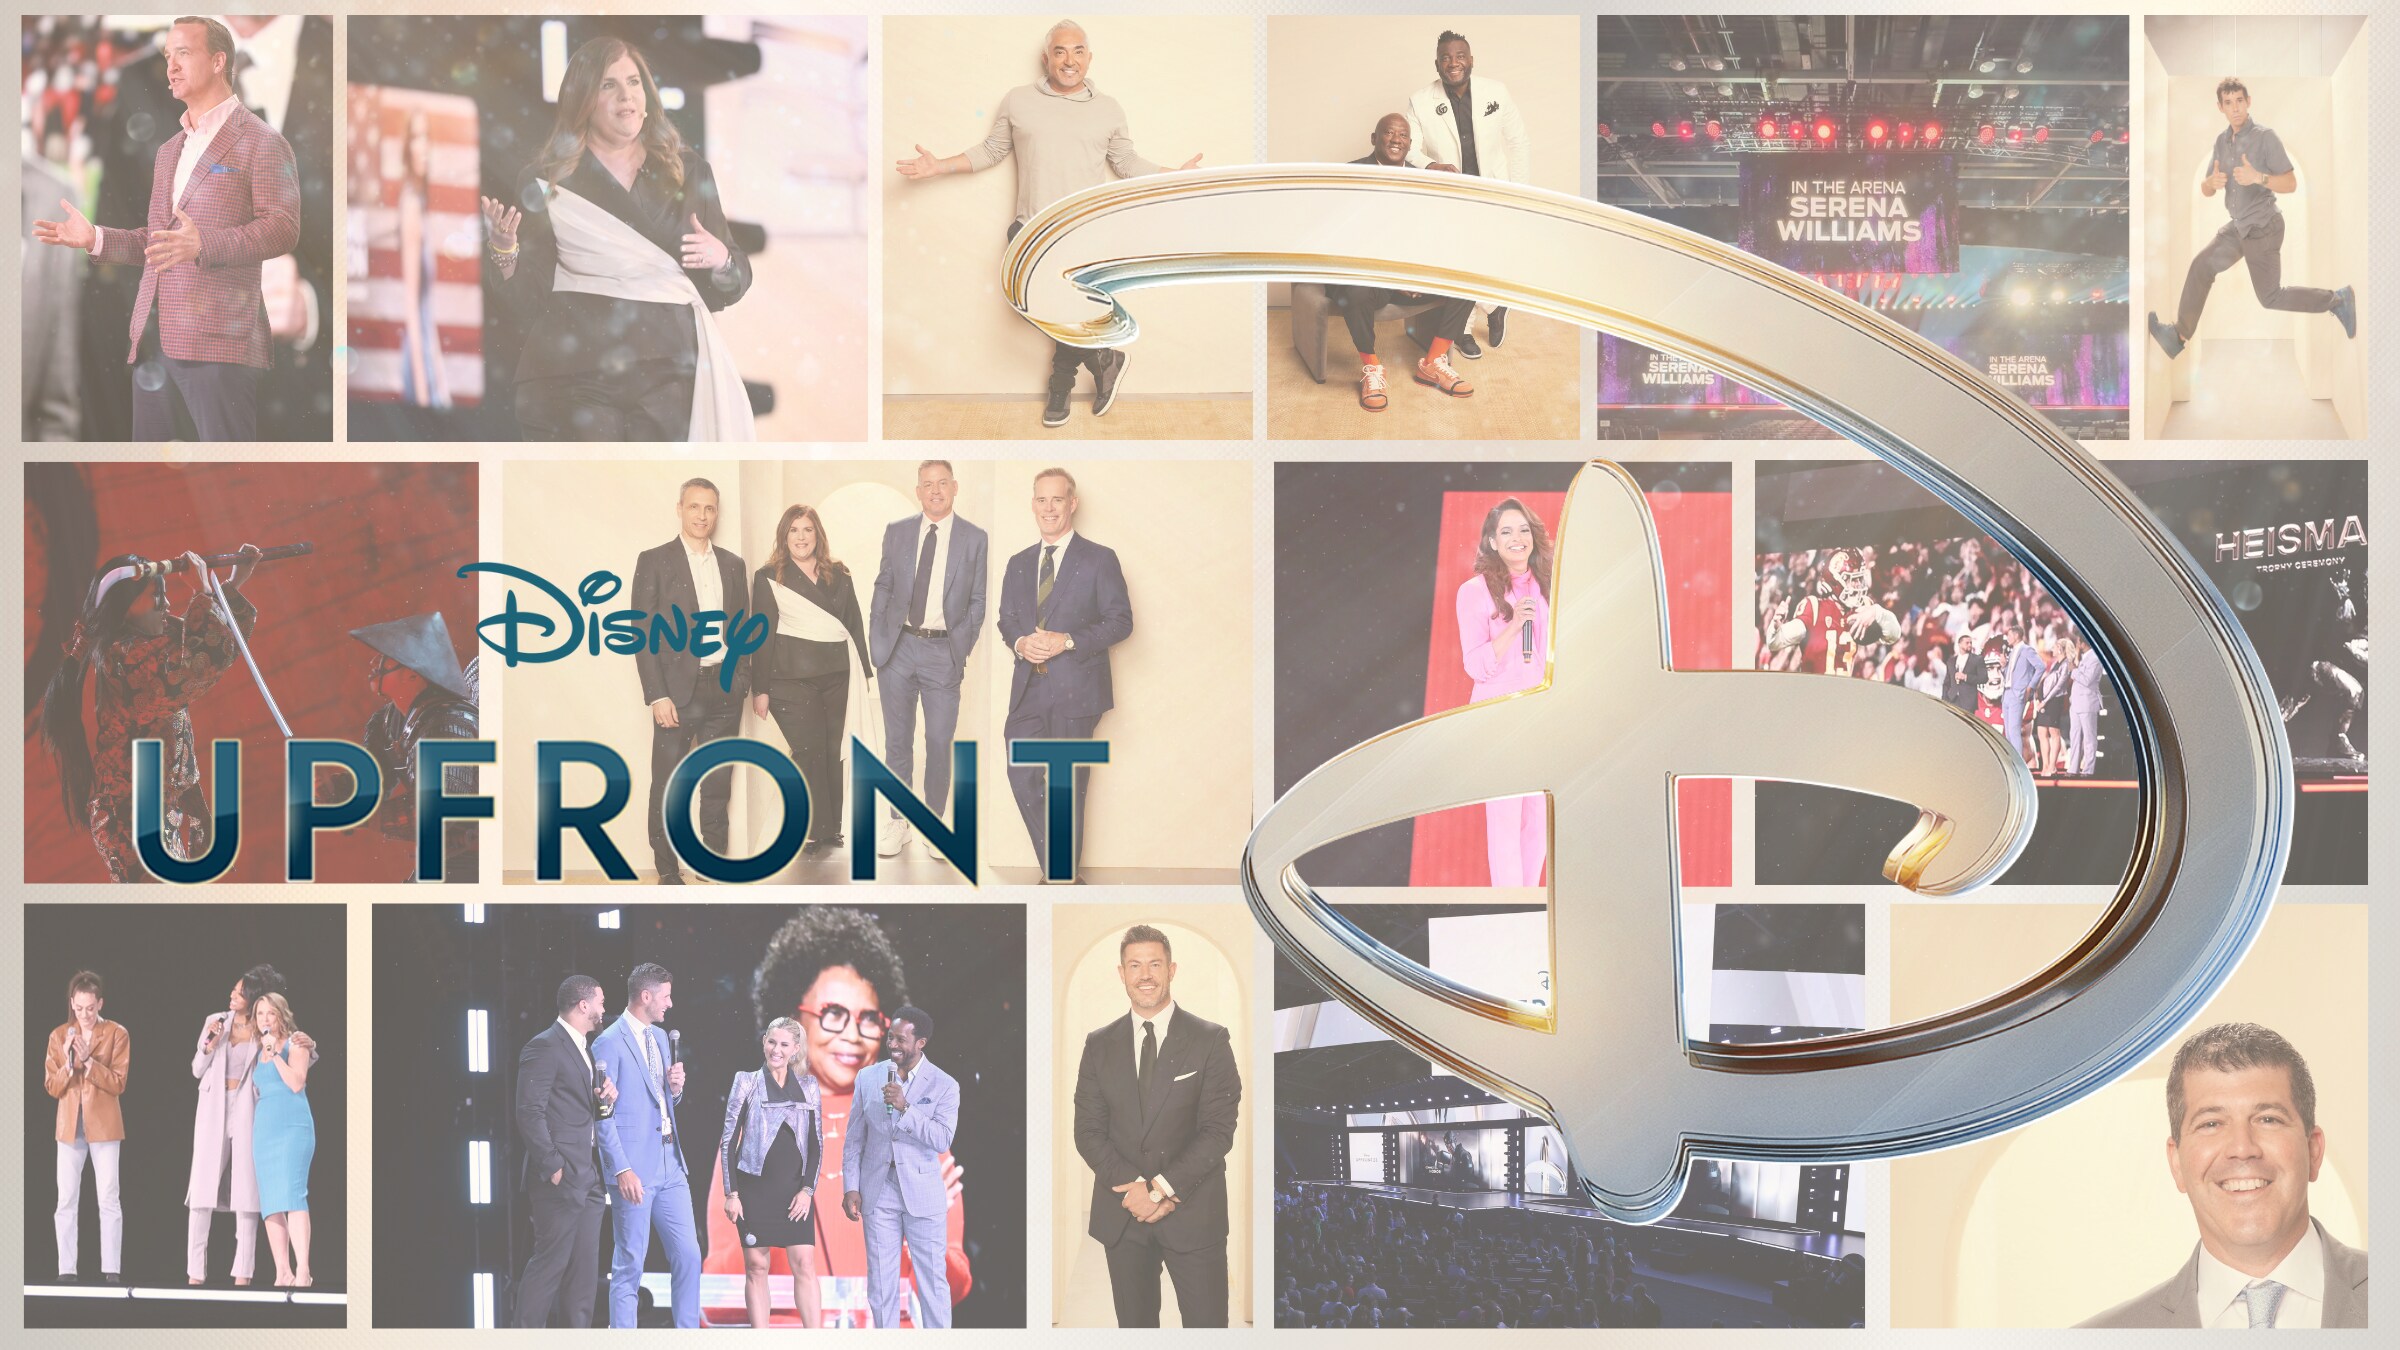 Disney’s Unrivaled Commitment to Creativity and Innovation  Brought to Life at State-of-the-Art, Best-in-Class Upfront Presentation